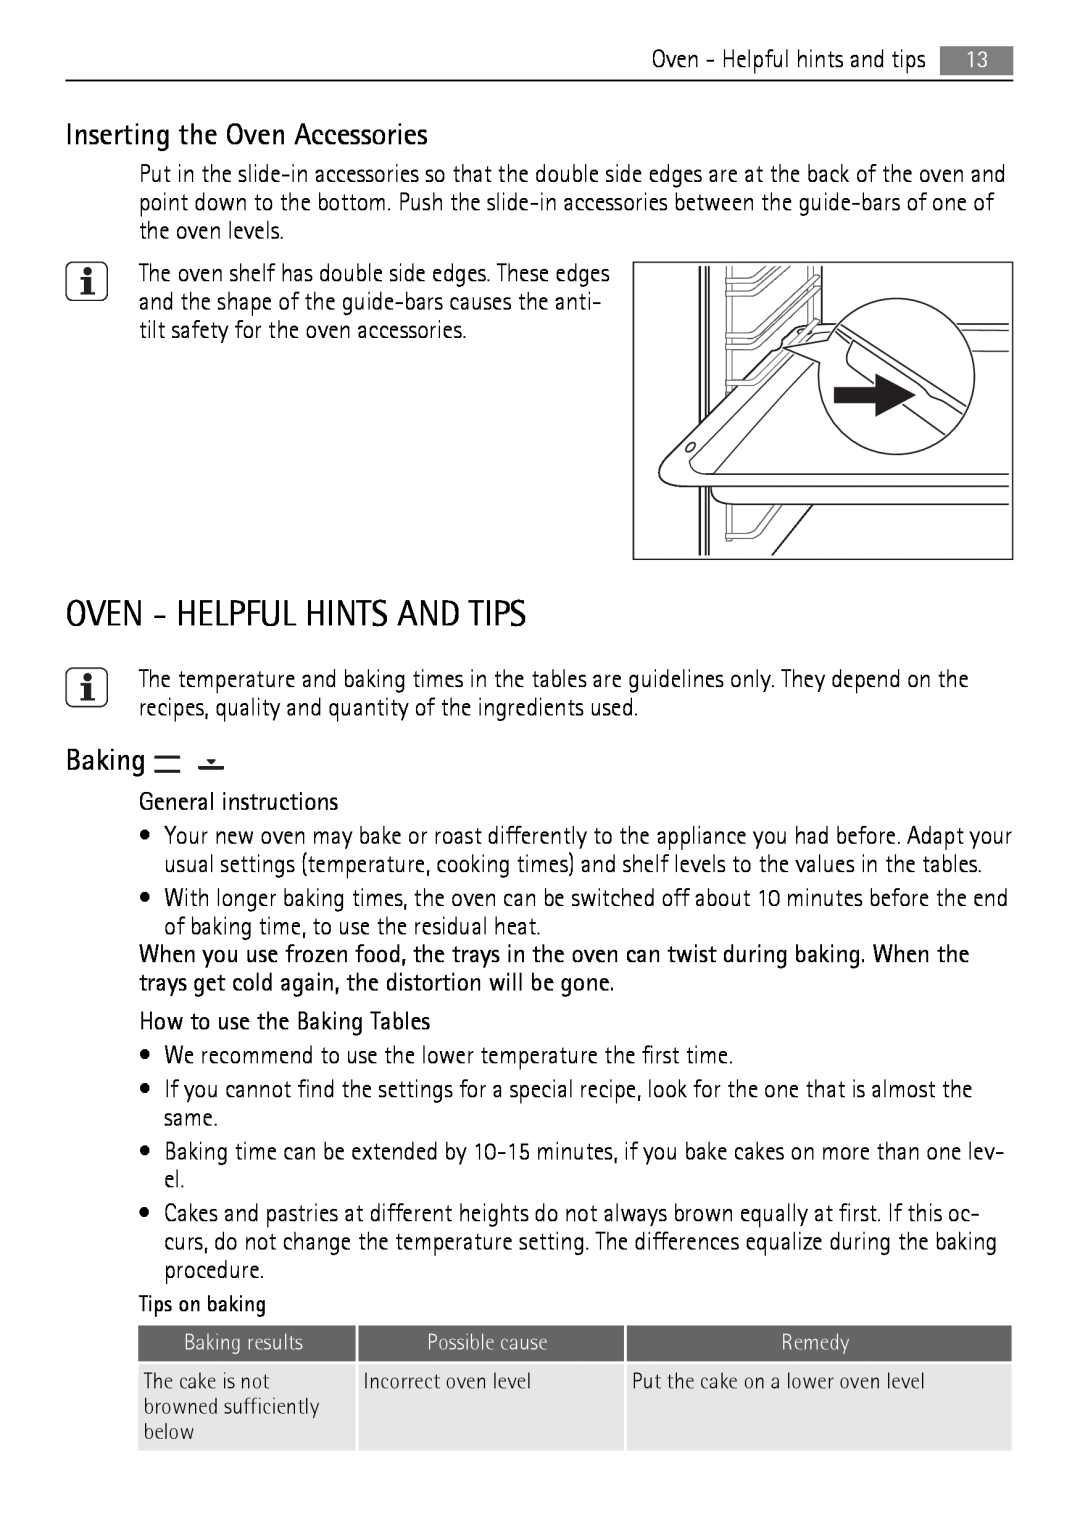 AEG 30006FF user manual Oven - Helpful Hints And Tips, Inserting the Oven Accessories, Baking 